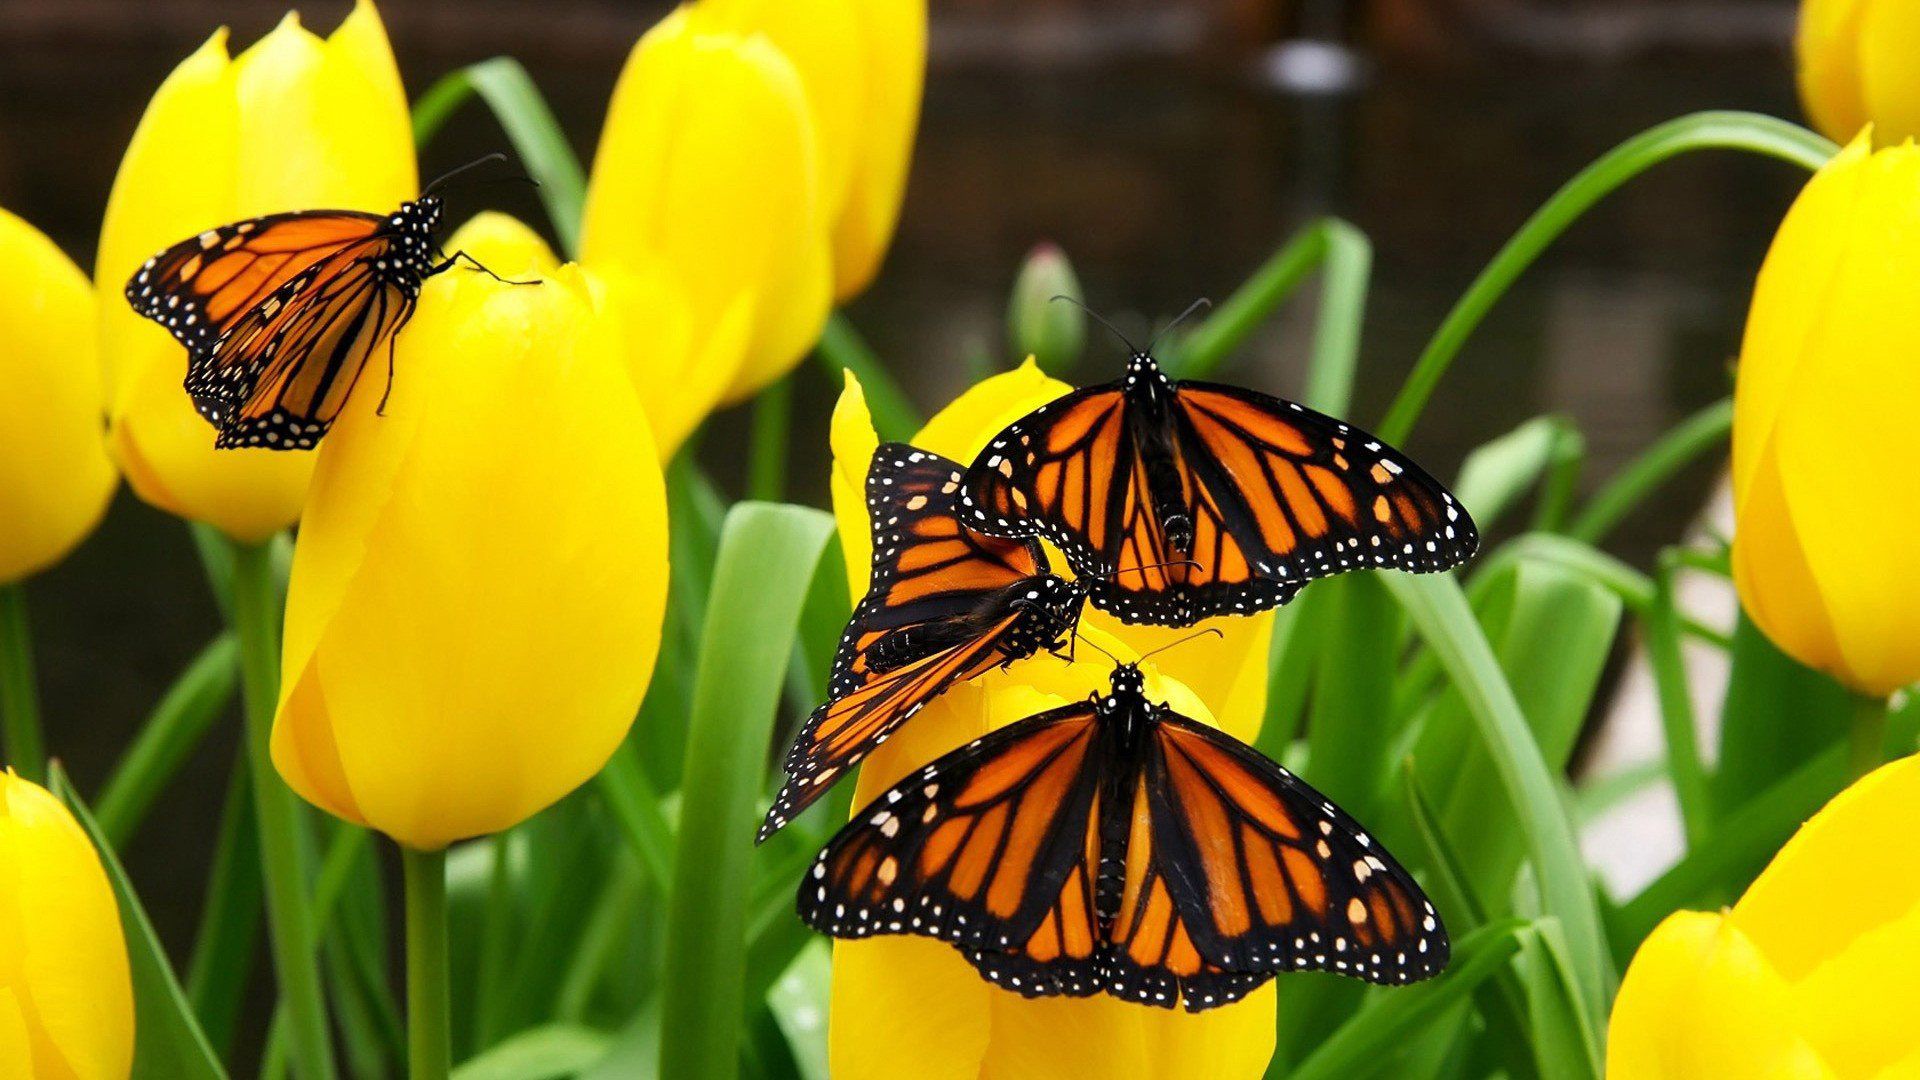 Butterfly Flowers Monarch Yellow Insects Original Image Butterfly Desktop Background Wallpaper & Background Download